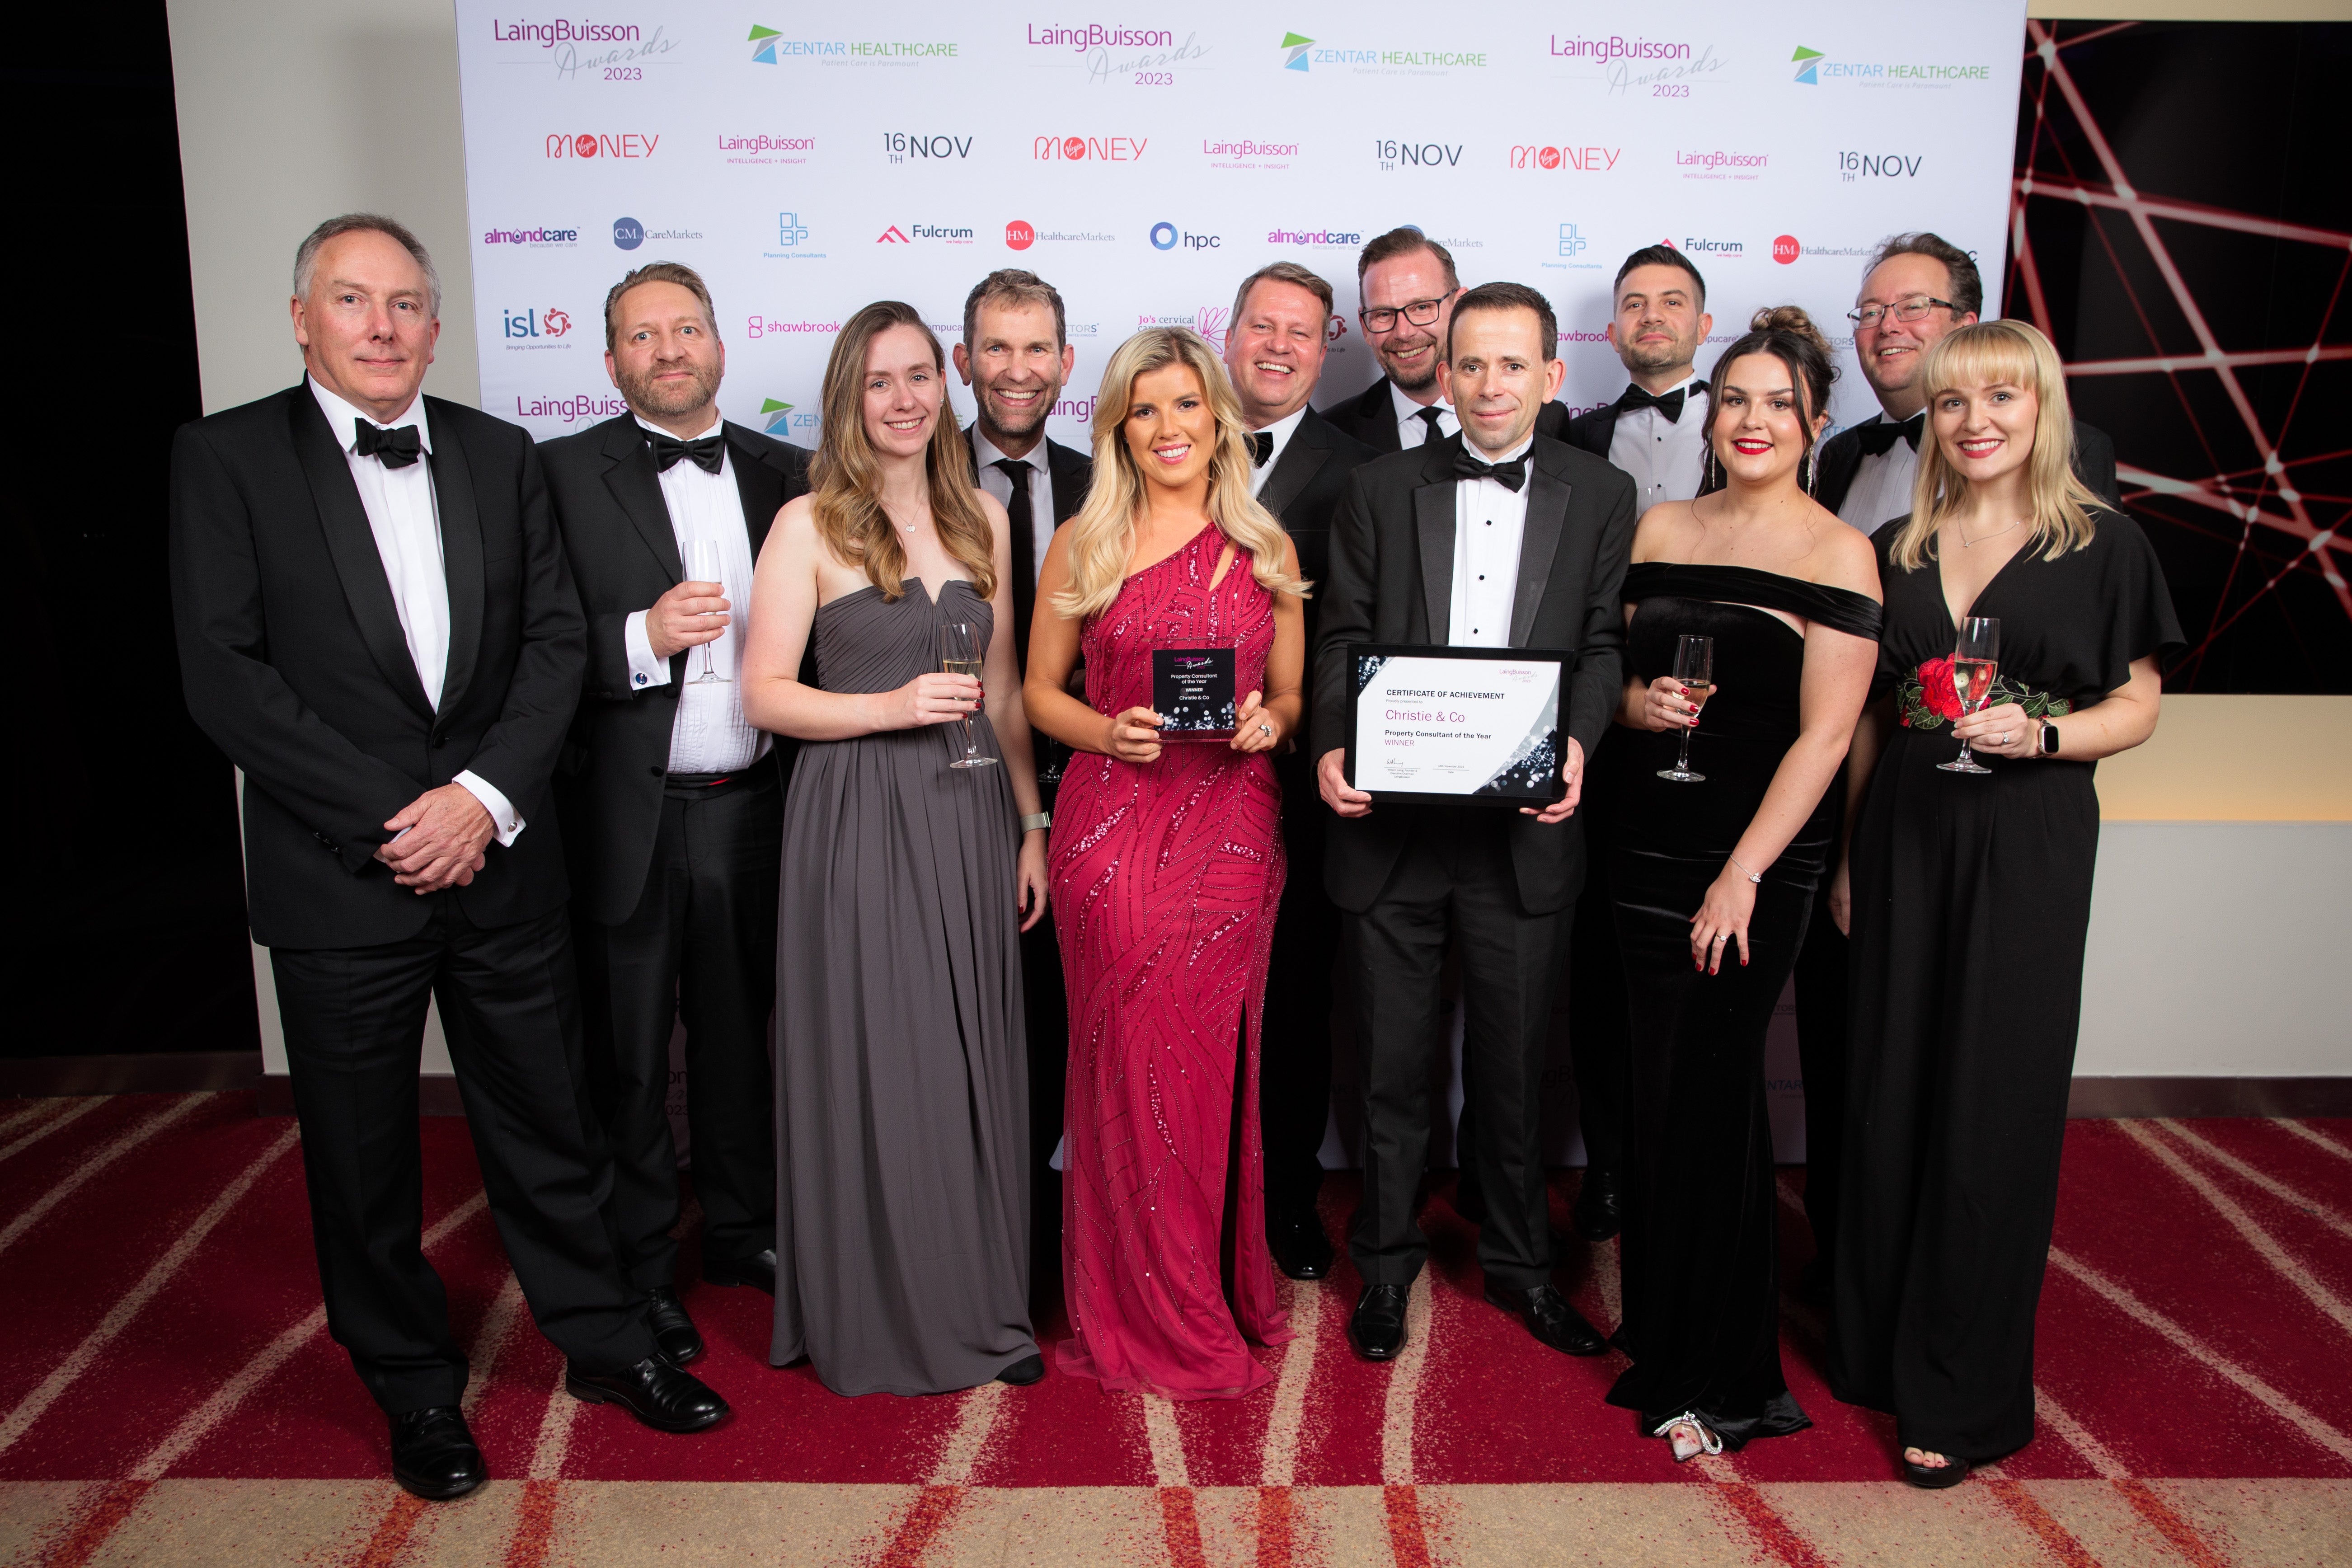 Christie & Co team at the LaingBuisson Awards 2023, where the company won the 'Property Consultant of the Year' award